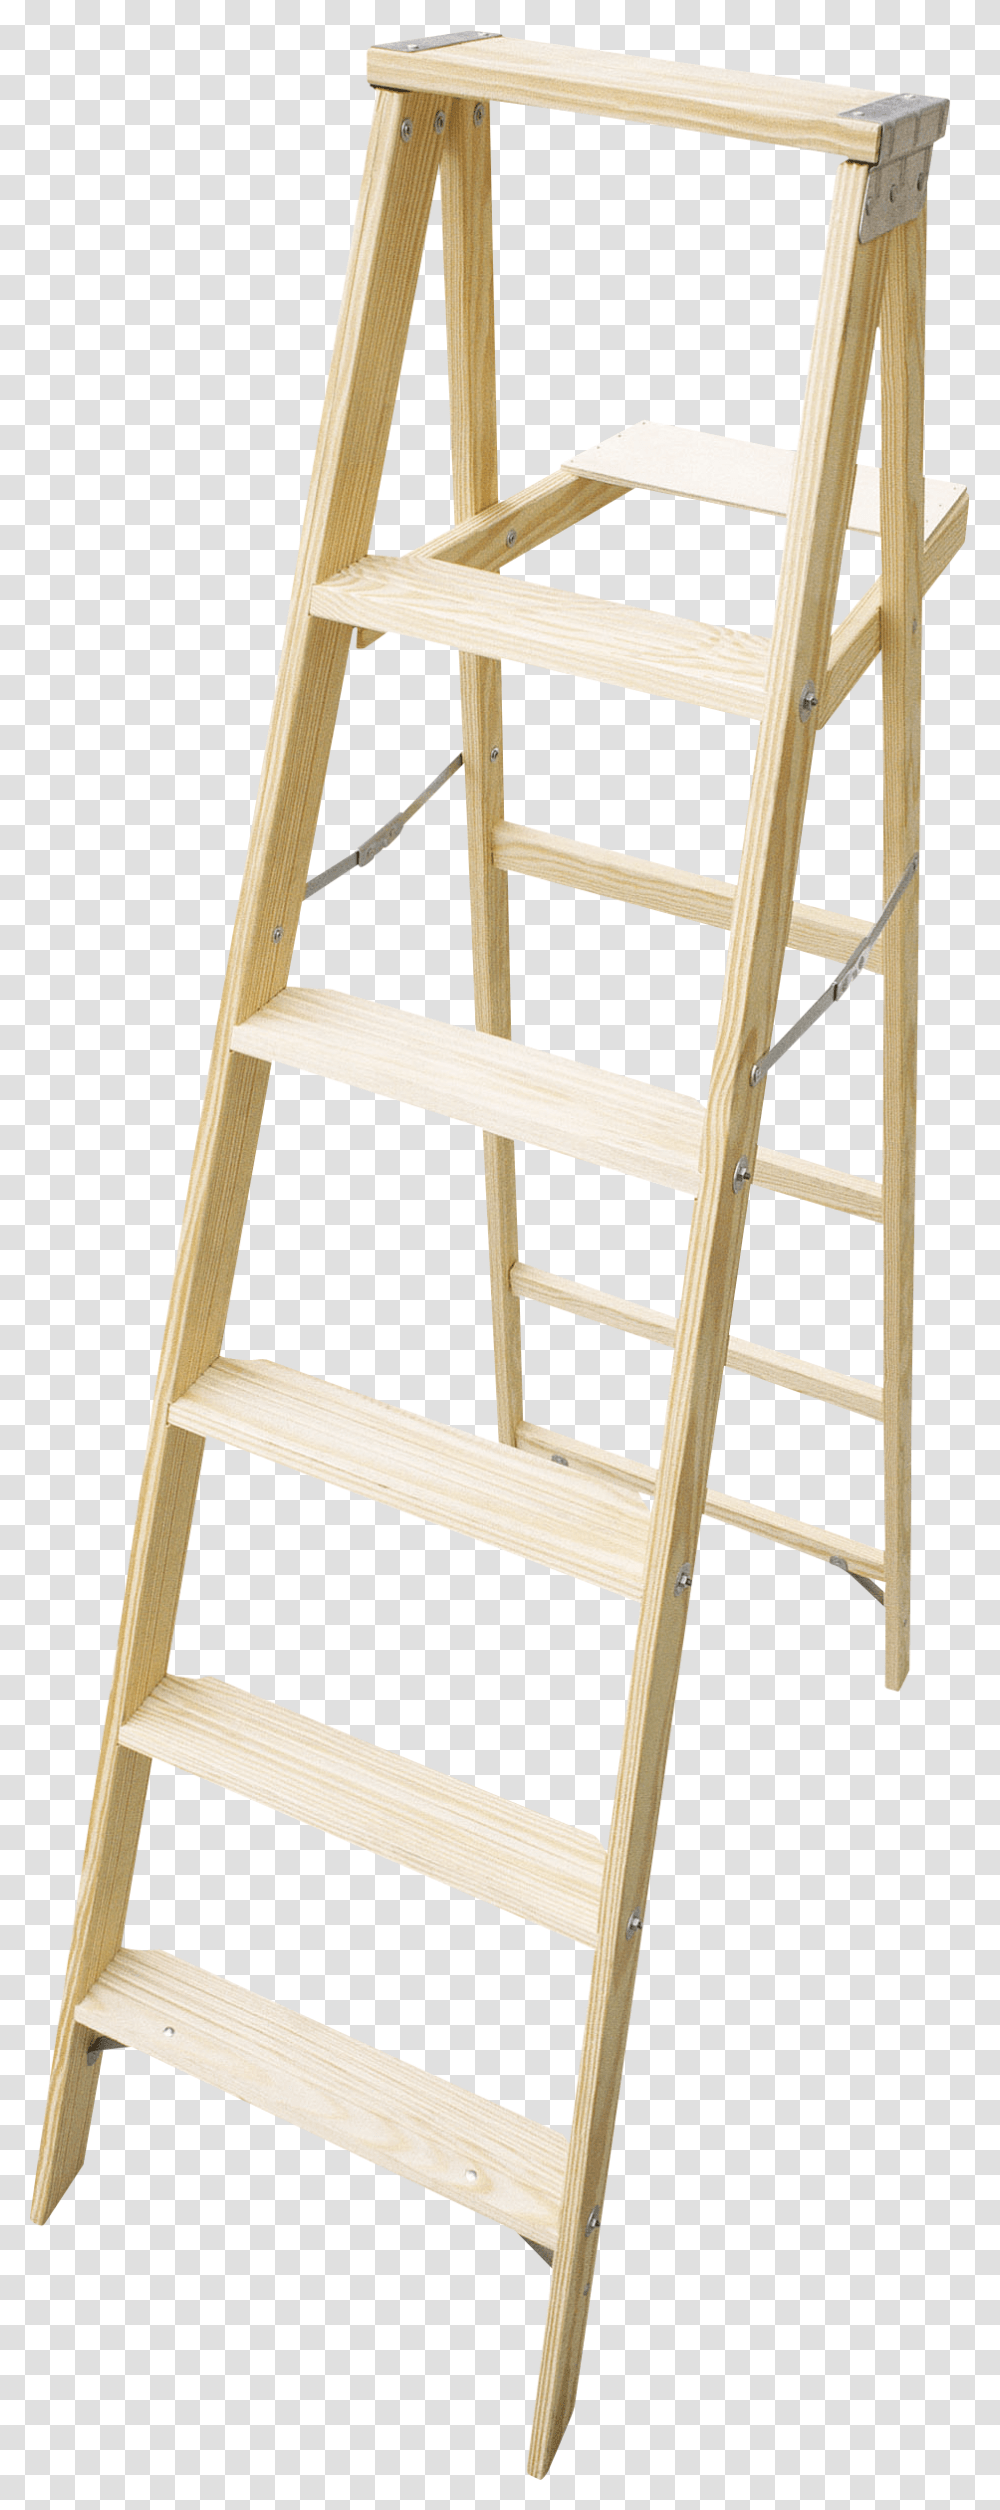 Ladder Portable Stairs, Stand, Shop, Wood, Chair Transparent Png